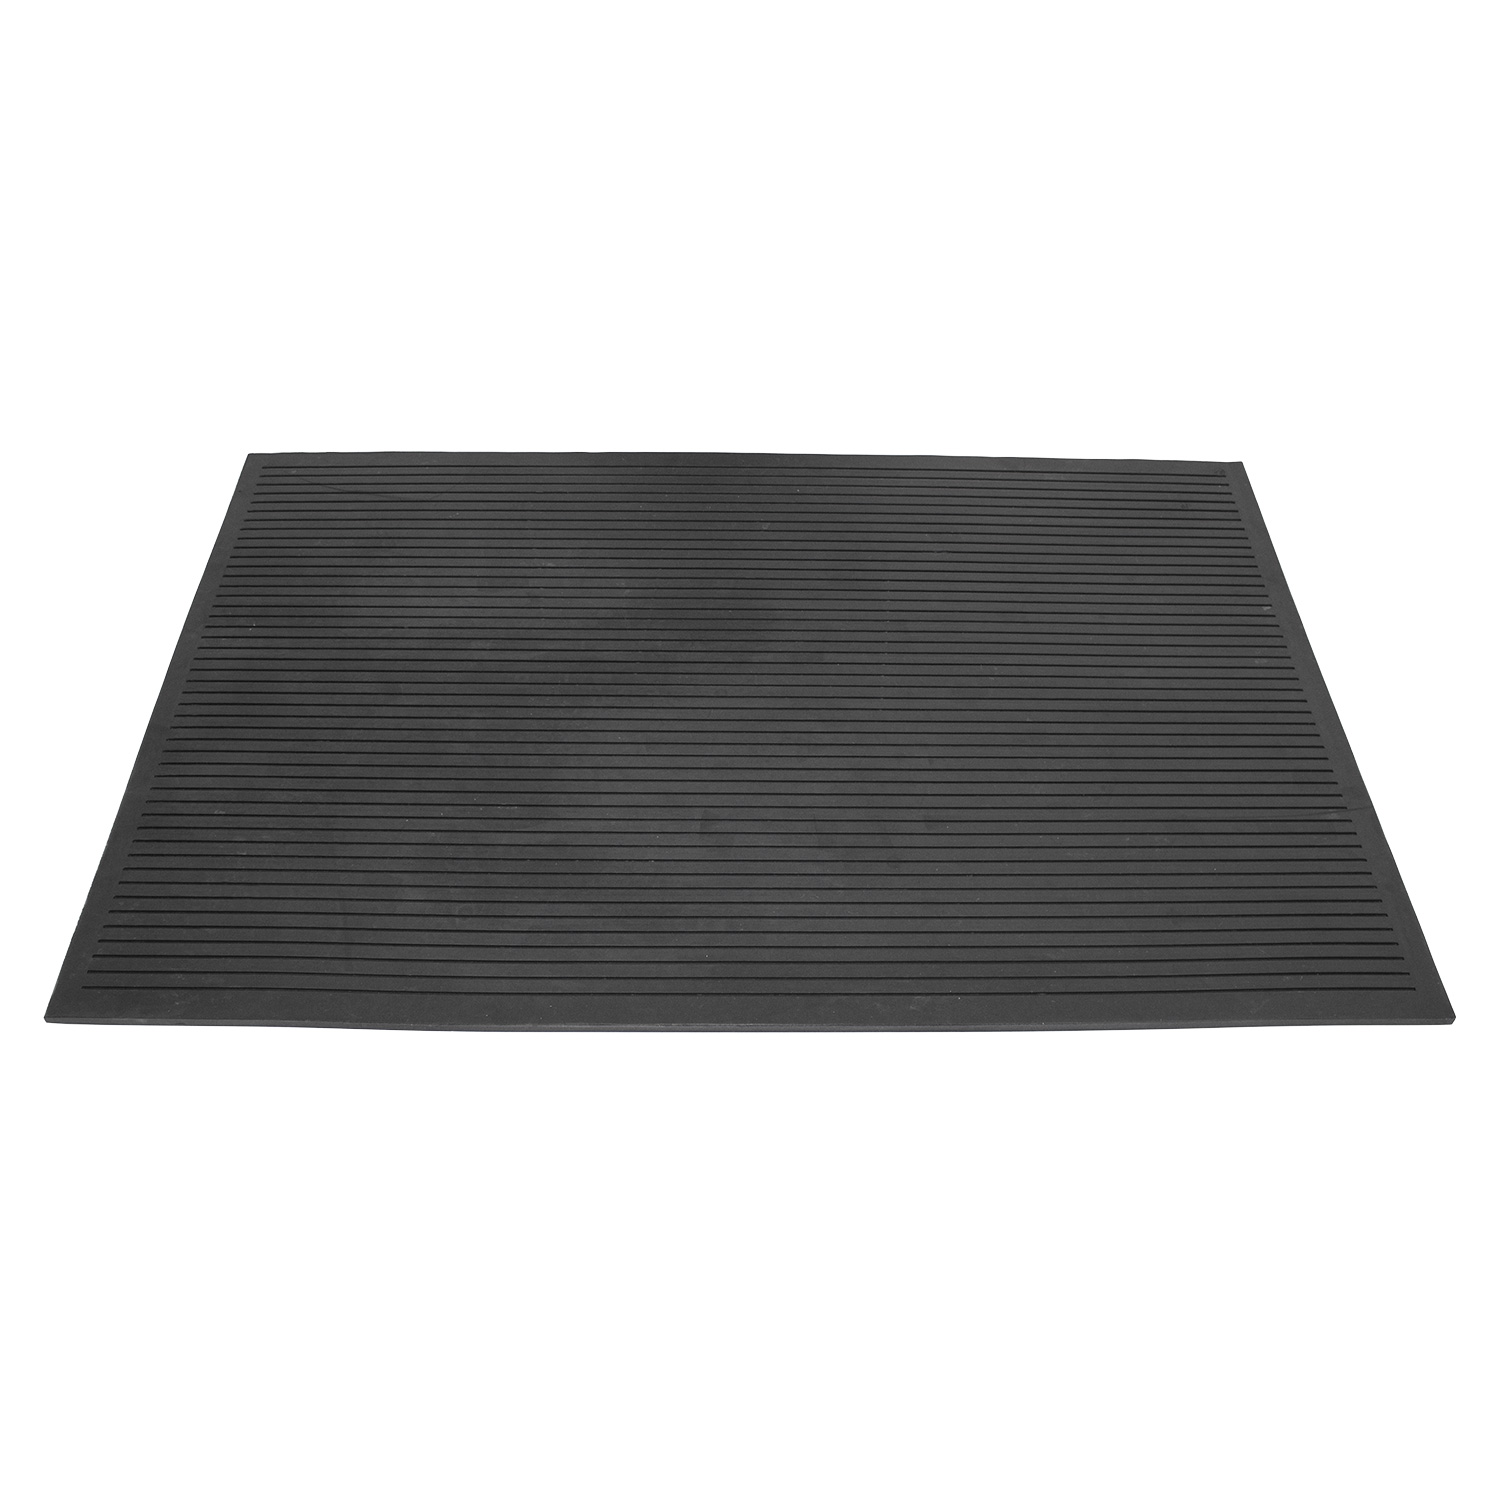 BodyPower™ Heavy Duty Commercial Rubber Gym Floor Mat 71.7" x 47.6" x 0.6" thick 5055734801688